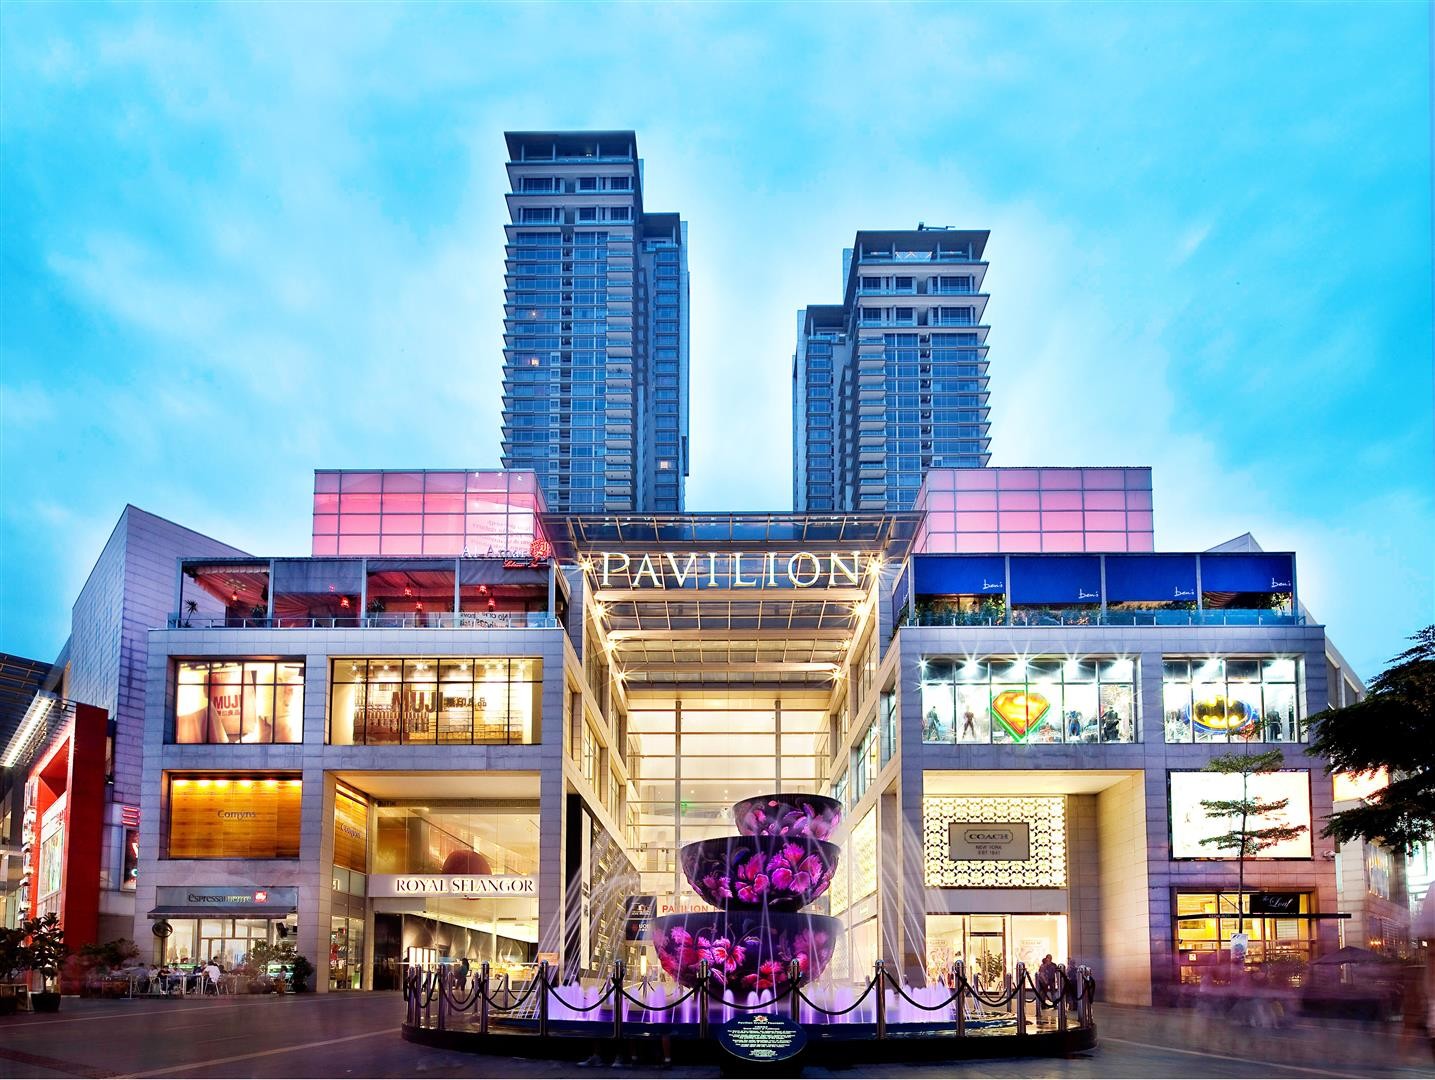 Pavilion shopping mall | What to do in Kuala Lumpur